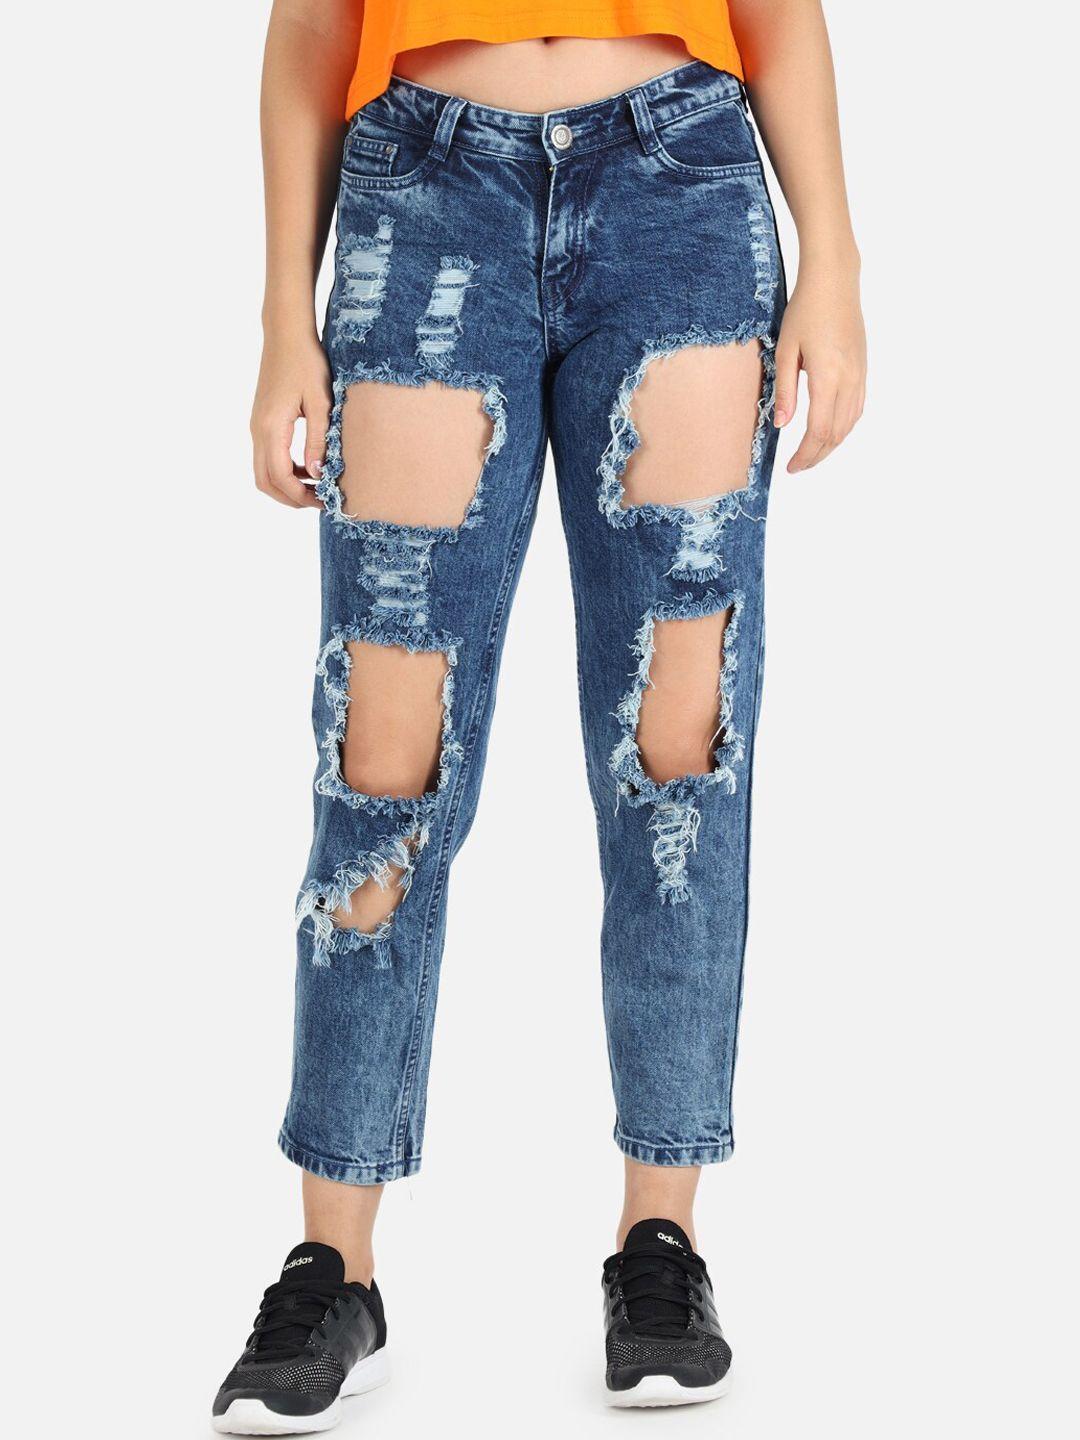 the dry state women blue highly distressed jeans